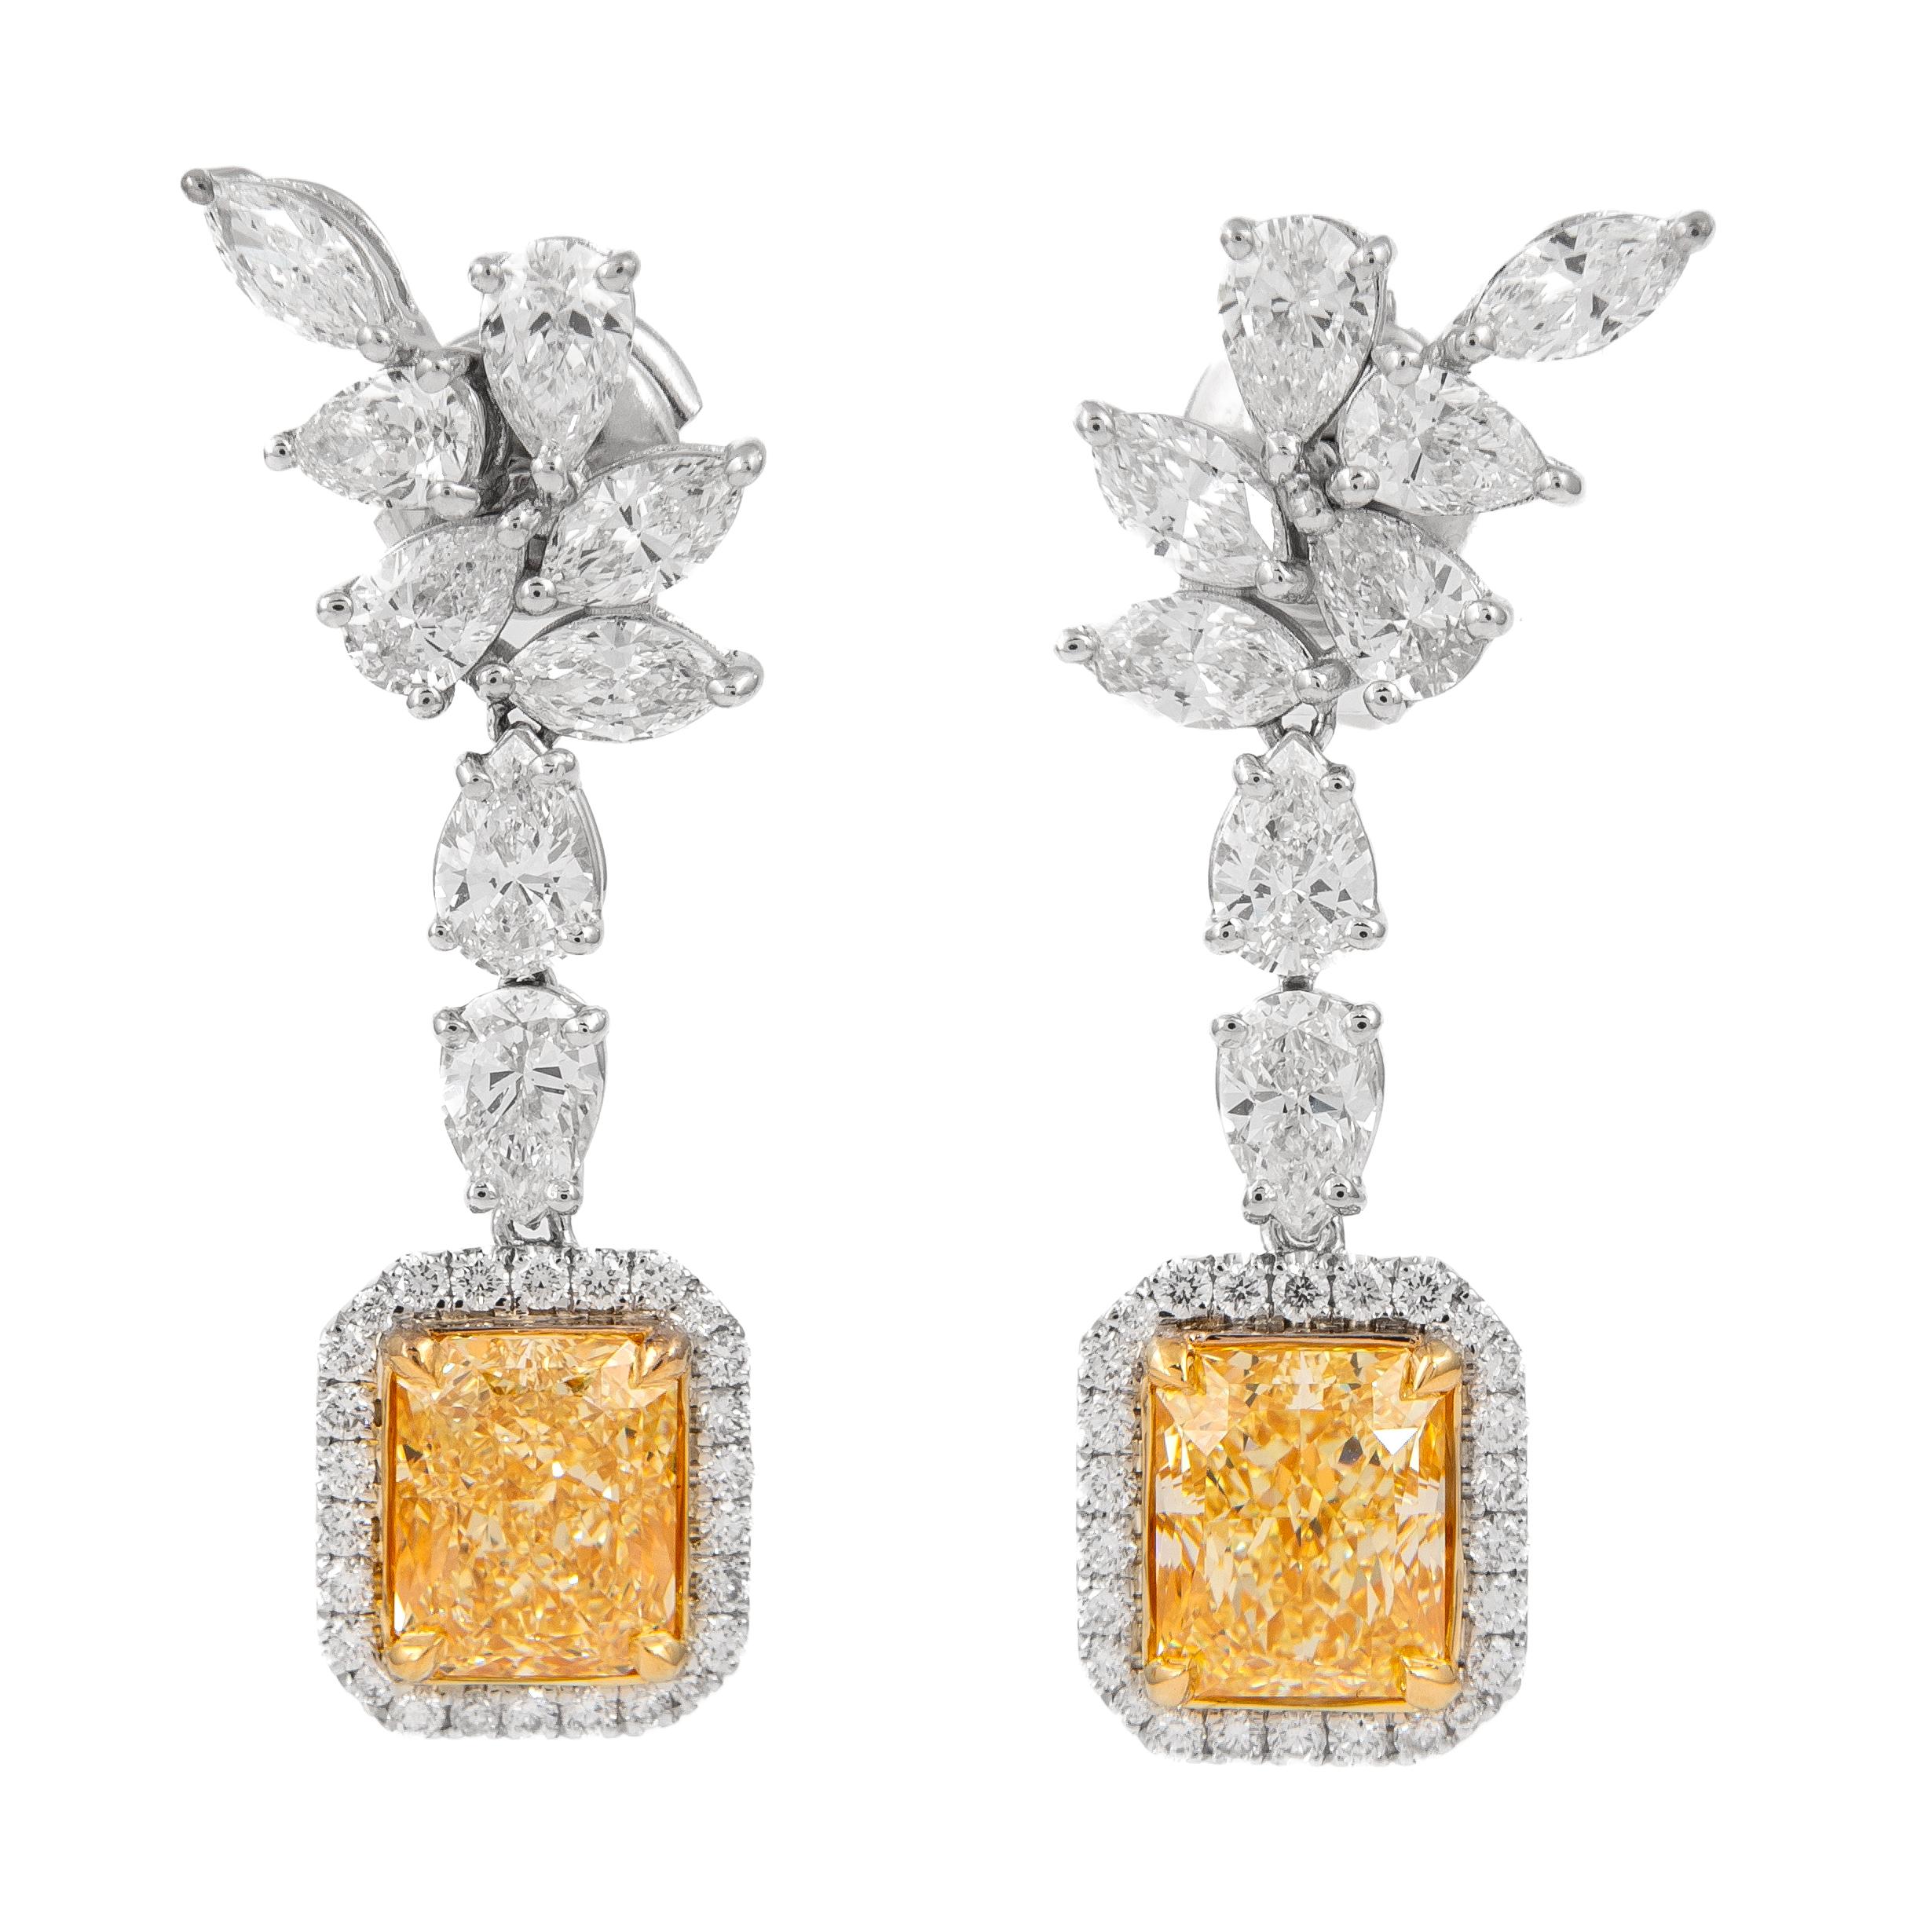 Contemporary Alexander GIA 4.45ct Fancy Yellow Diamond Drop Earrings with Halo 18k Gold For Sale